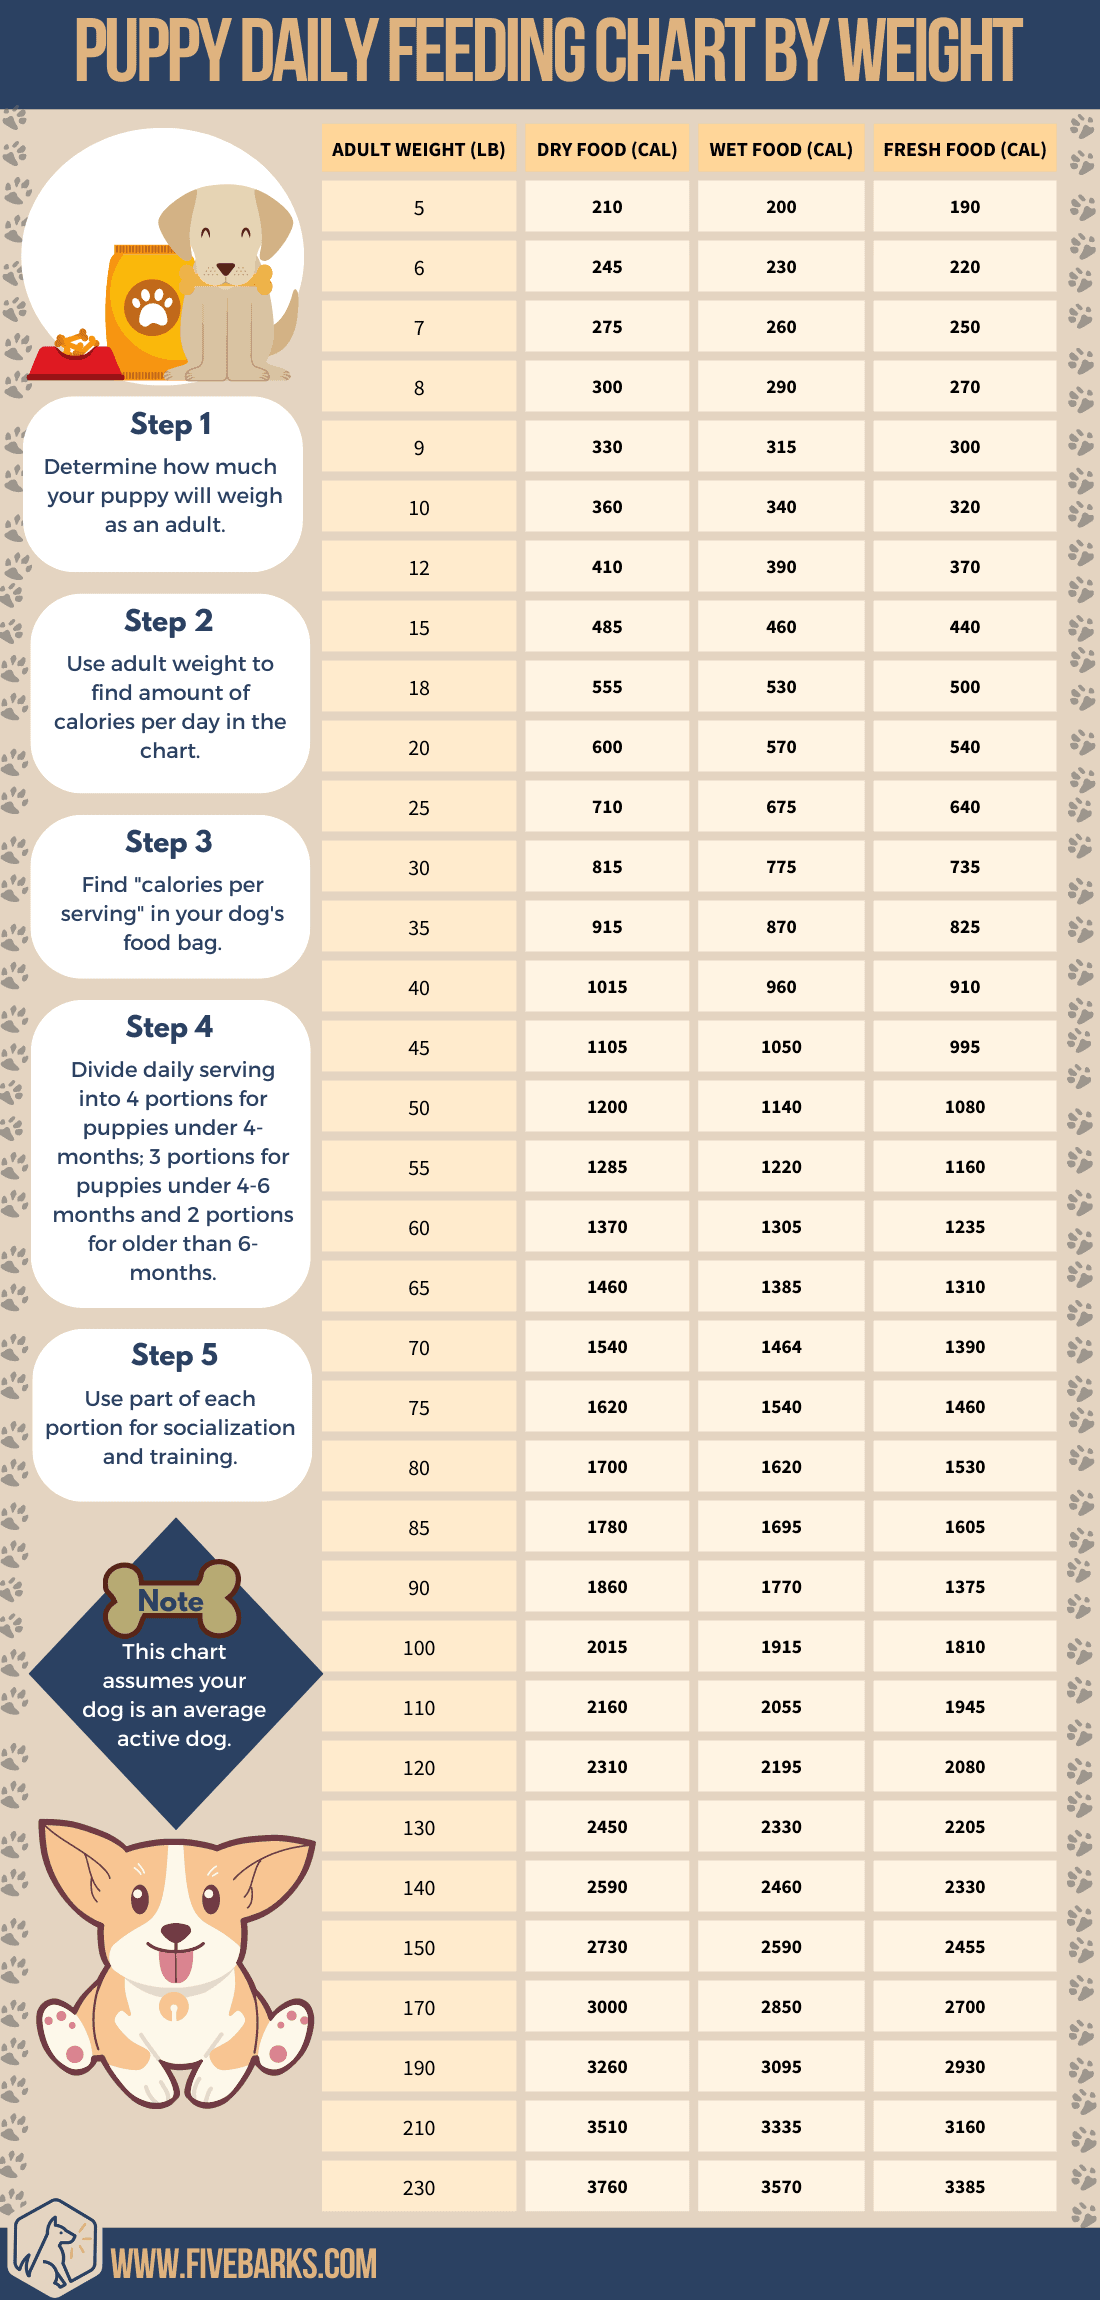 Puppy Feeding Chart by Weight